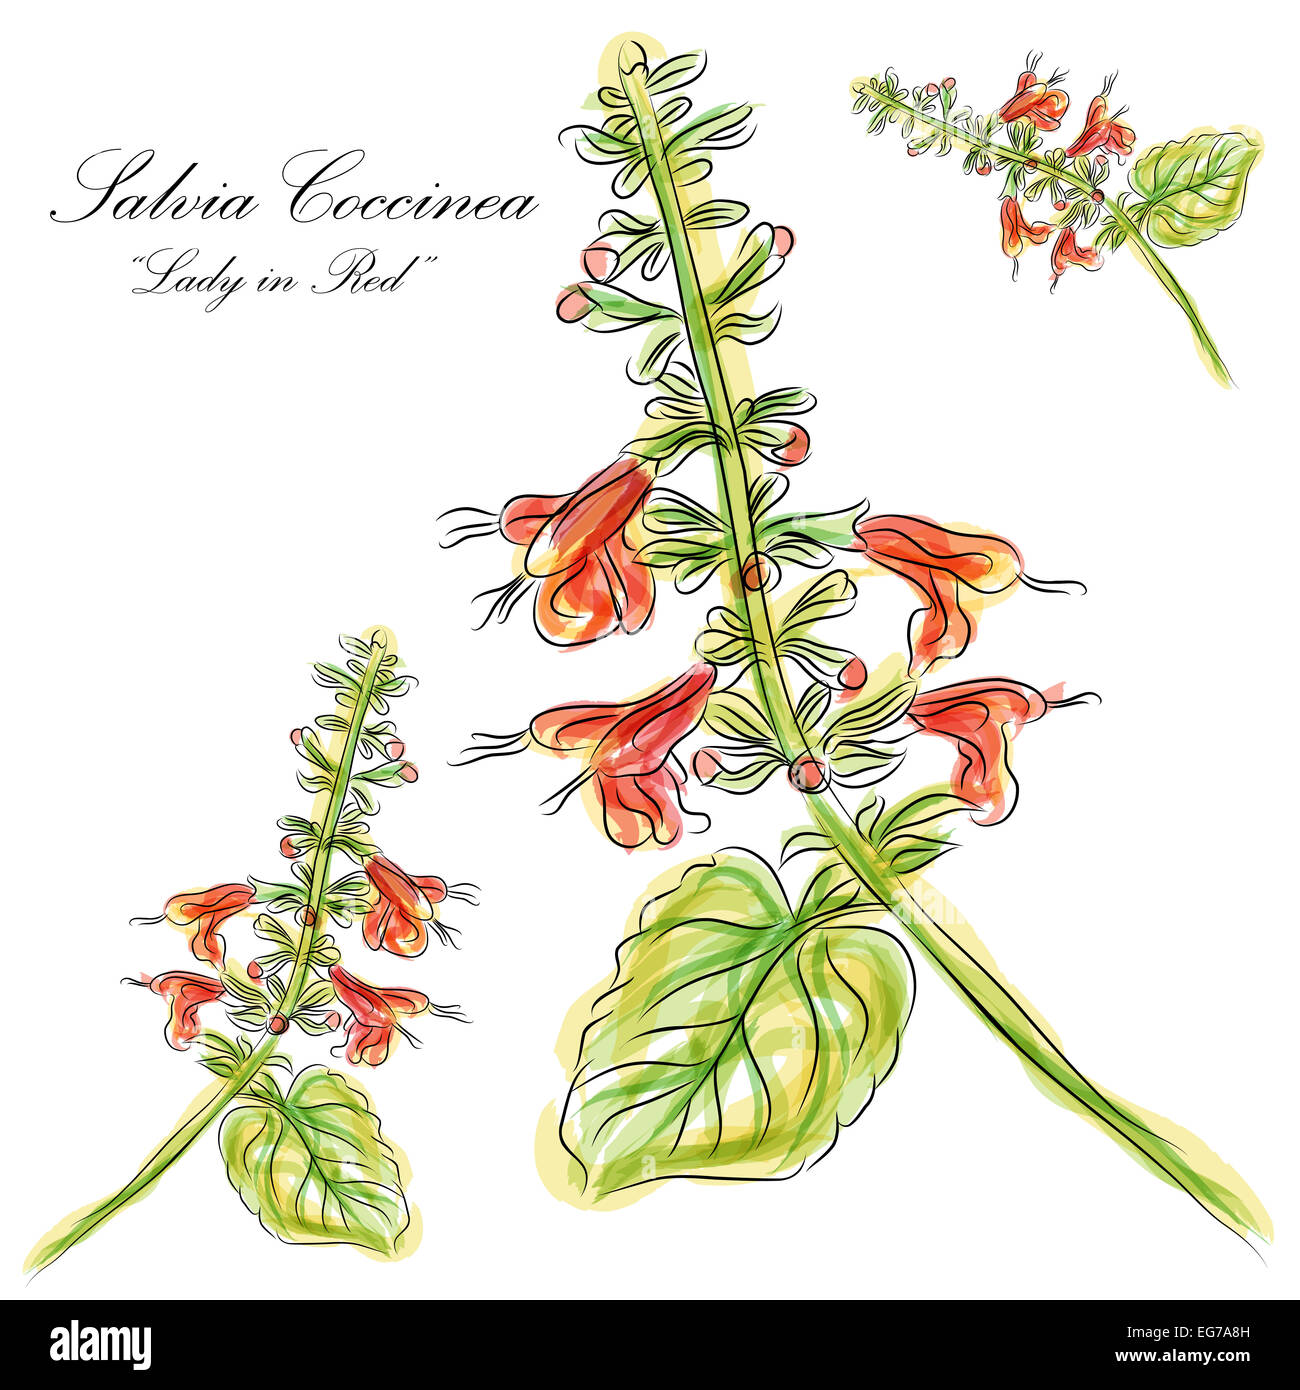 An image of a watercolor Salvia Coccinea lady in red flower. Stock Photo